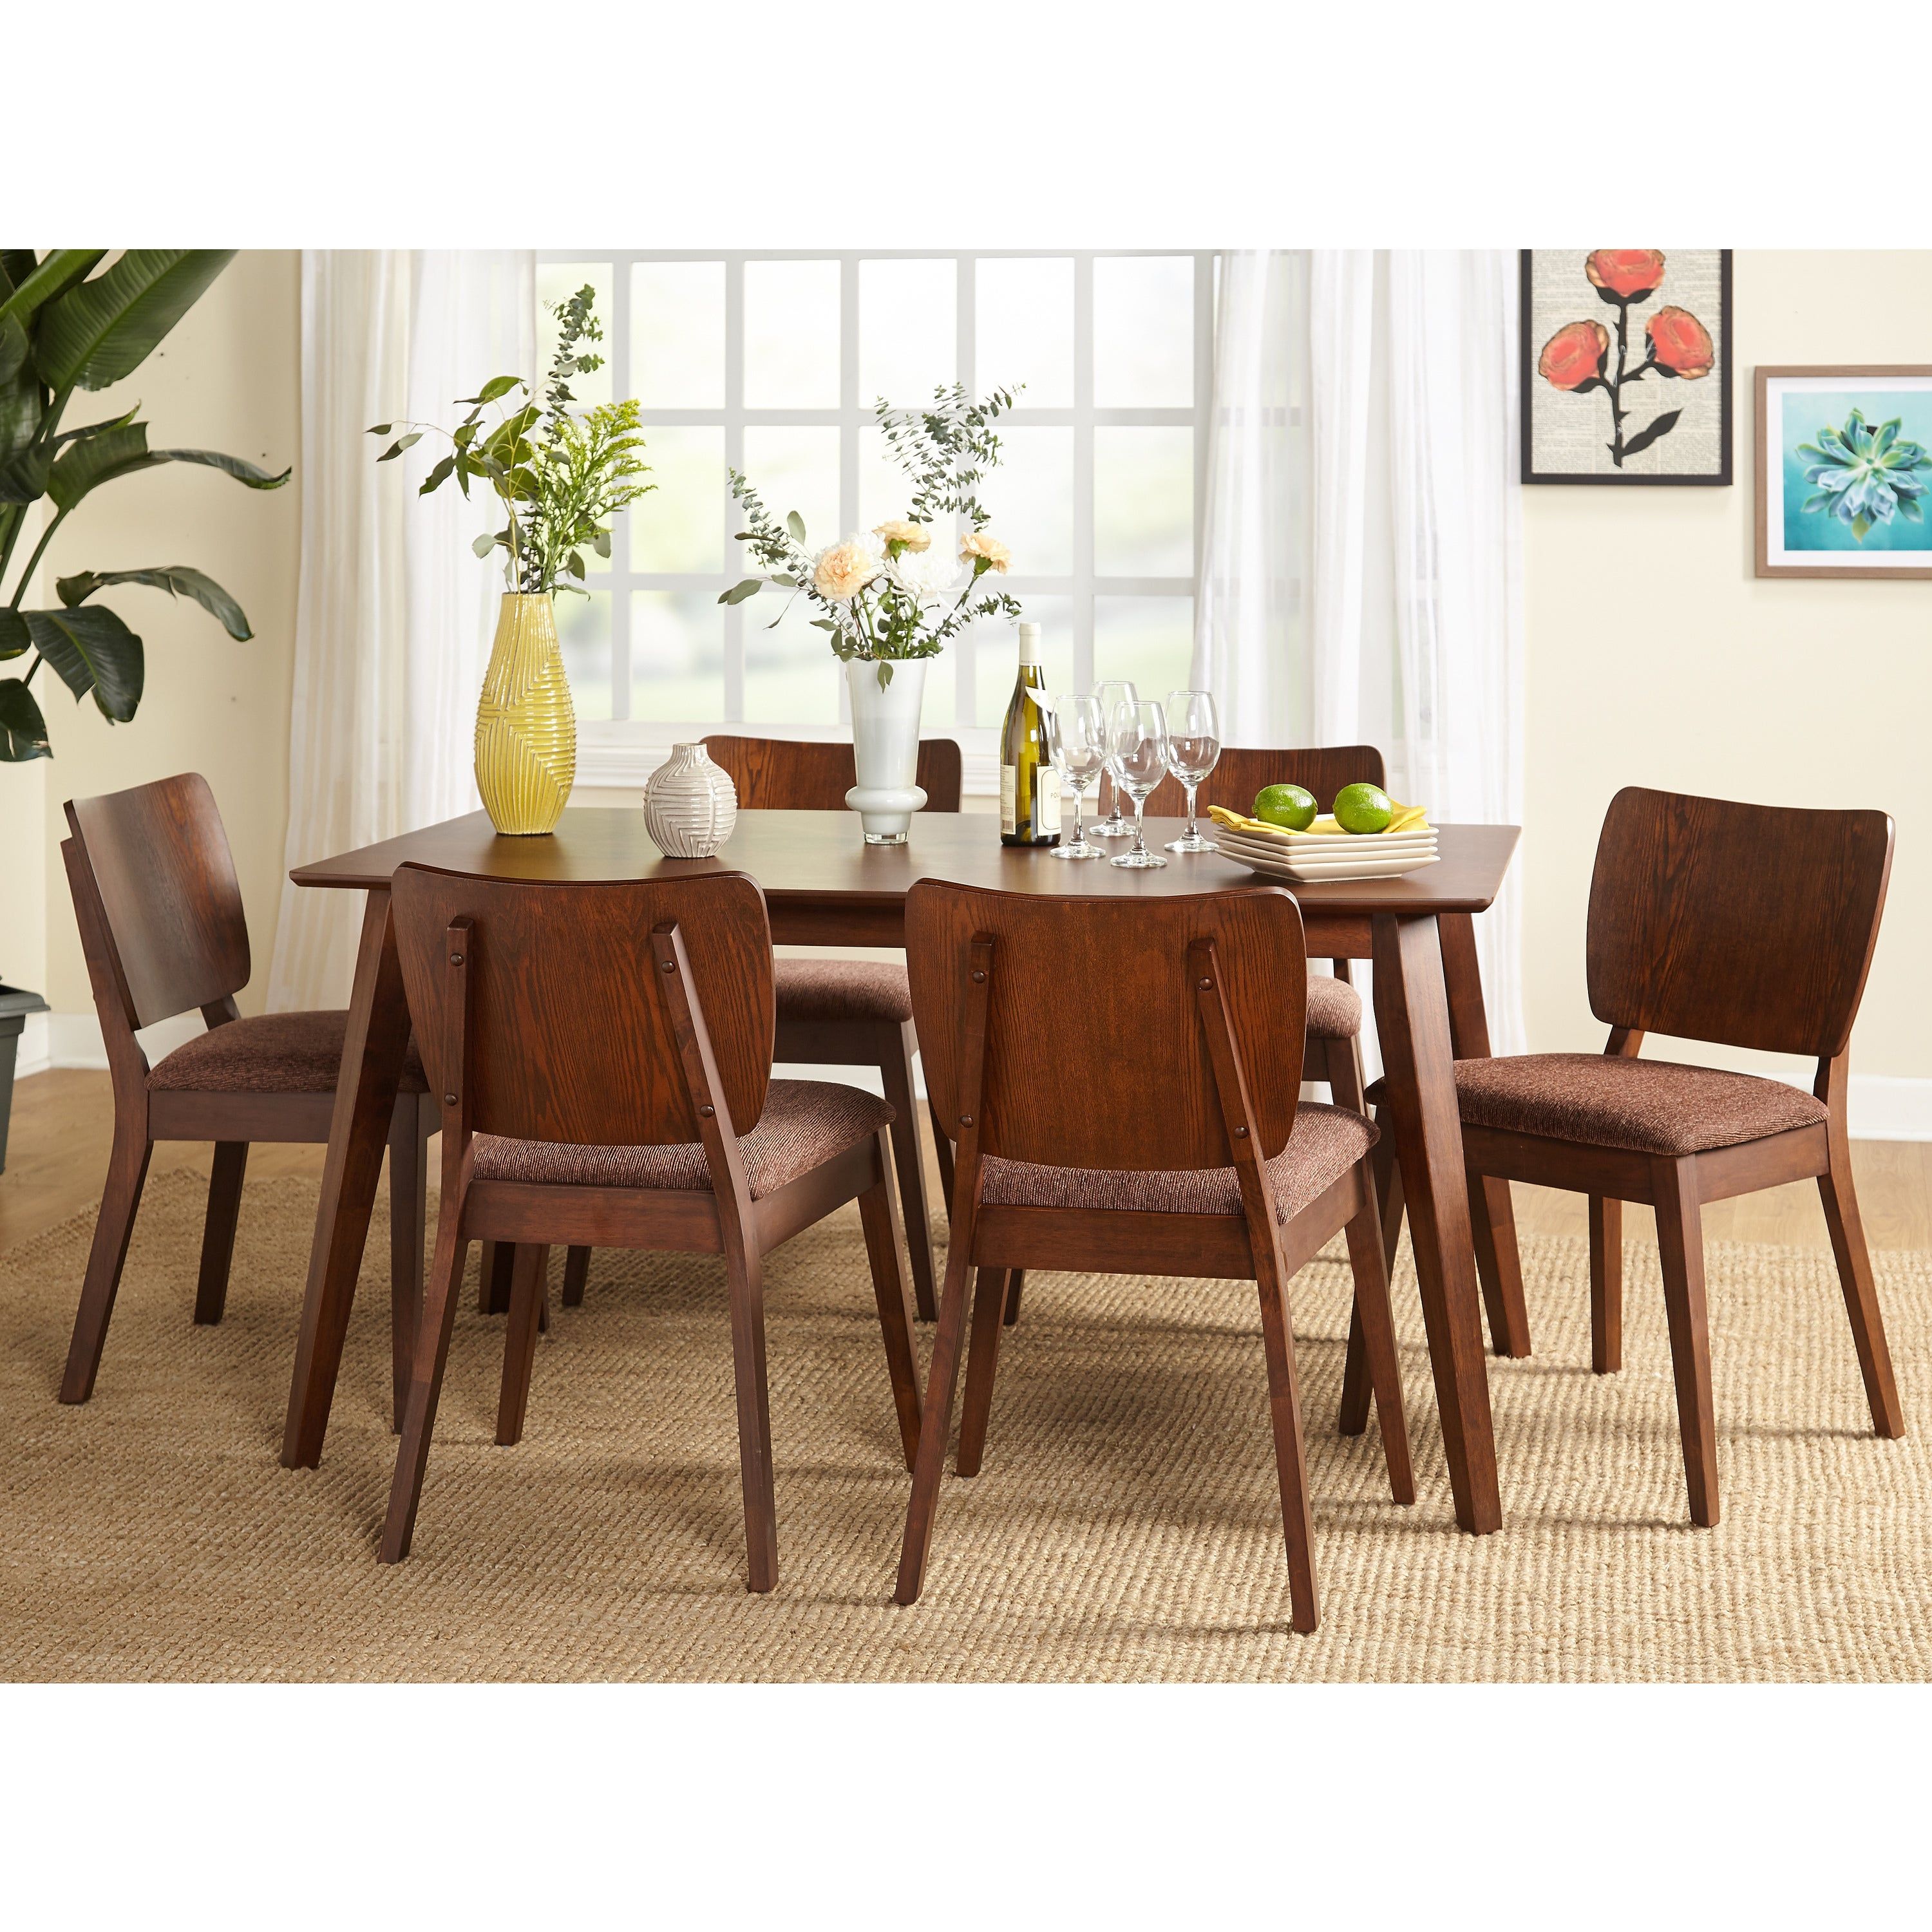 Famous Buy 5 Piece Sets Kitchen & Dining Room Sets Online At Overstock Regarding West Hill Family Table 3 Piece Dining Sets (Photo 8 of 20)